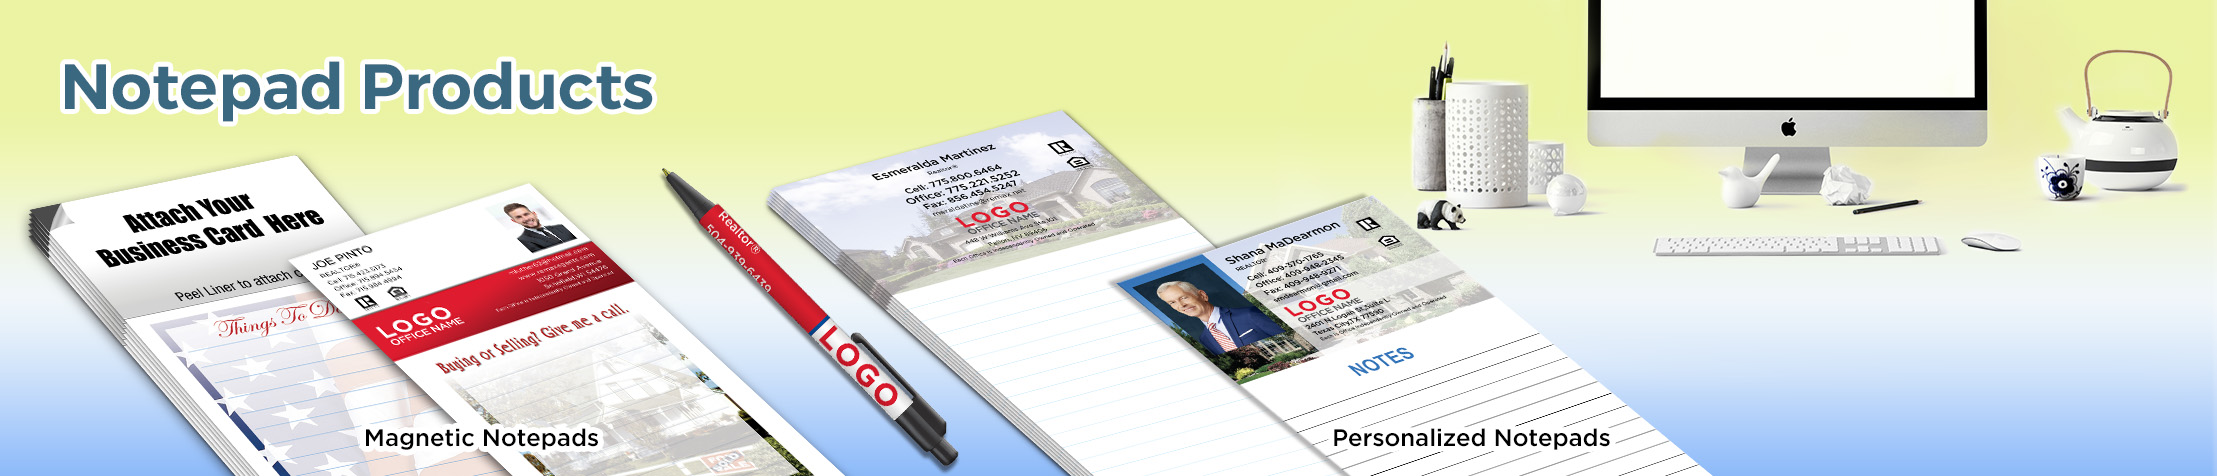 RE/MAX Real Estate Notepads - RE/MAX custom stationery and marketing tools, magnetic and personalized notepads | BestPrintBuy.com